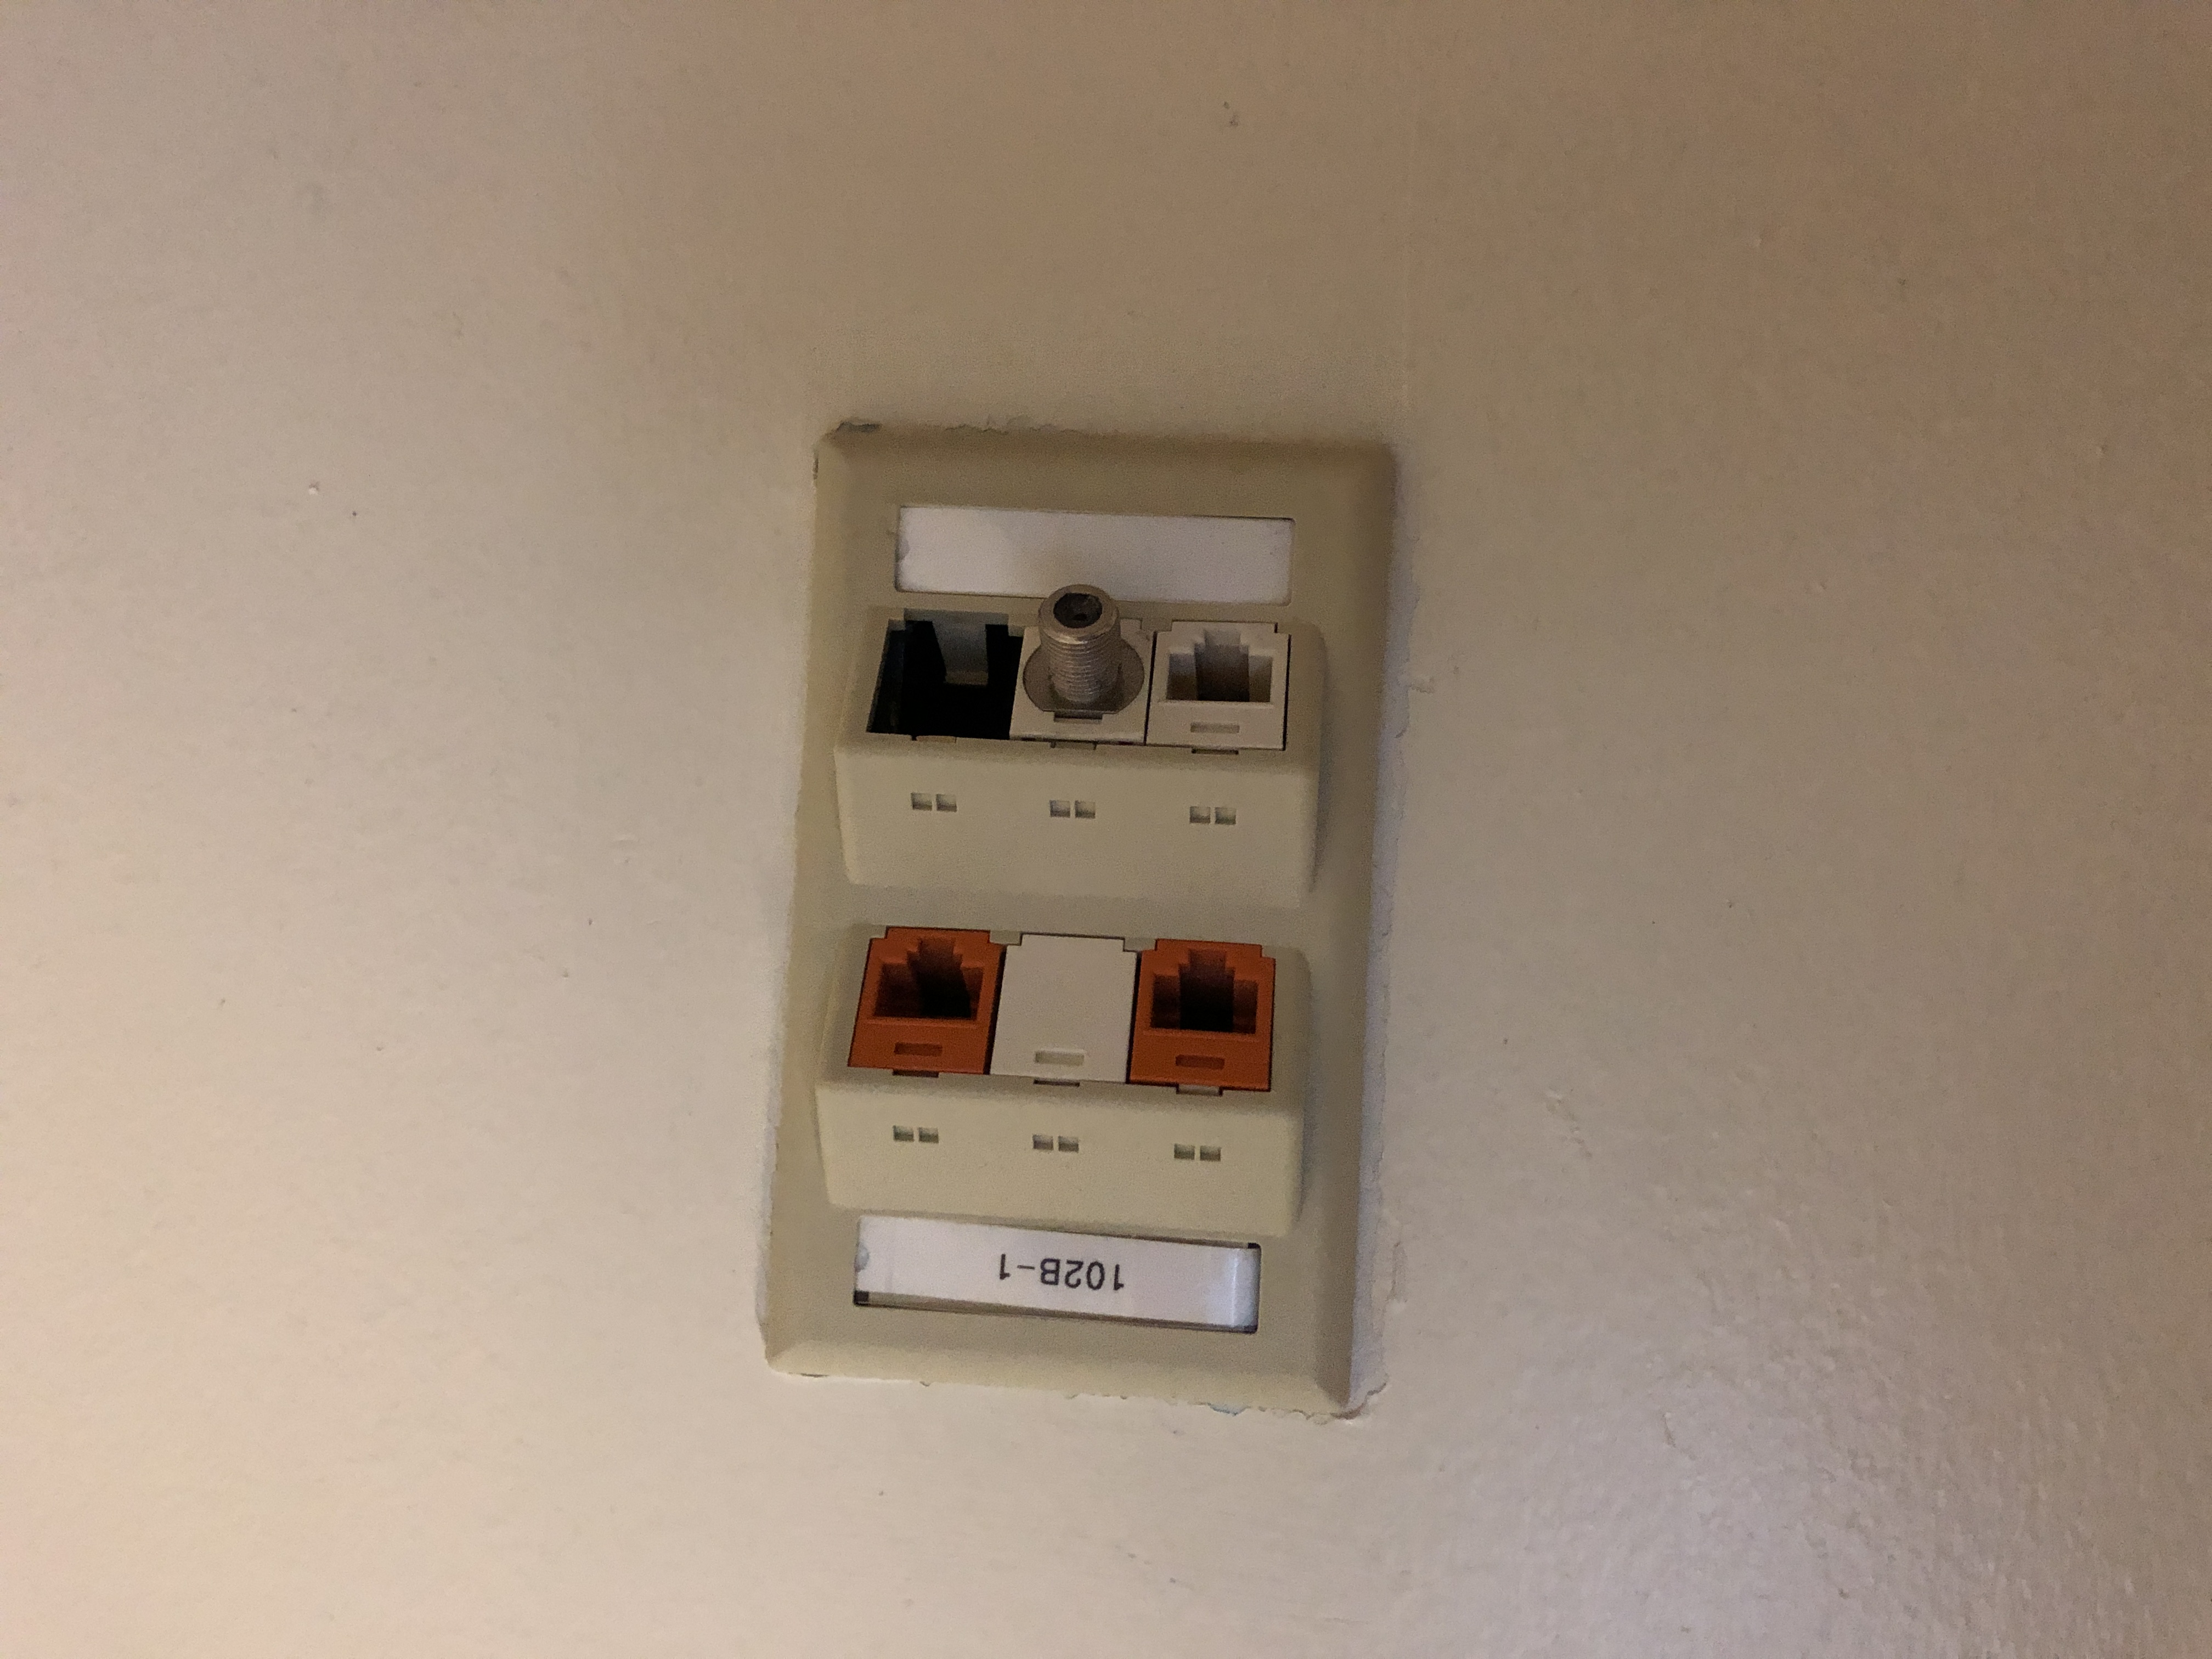 Network connection panel with orange and black connectors